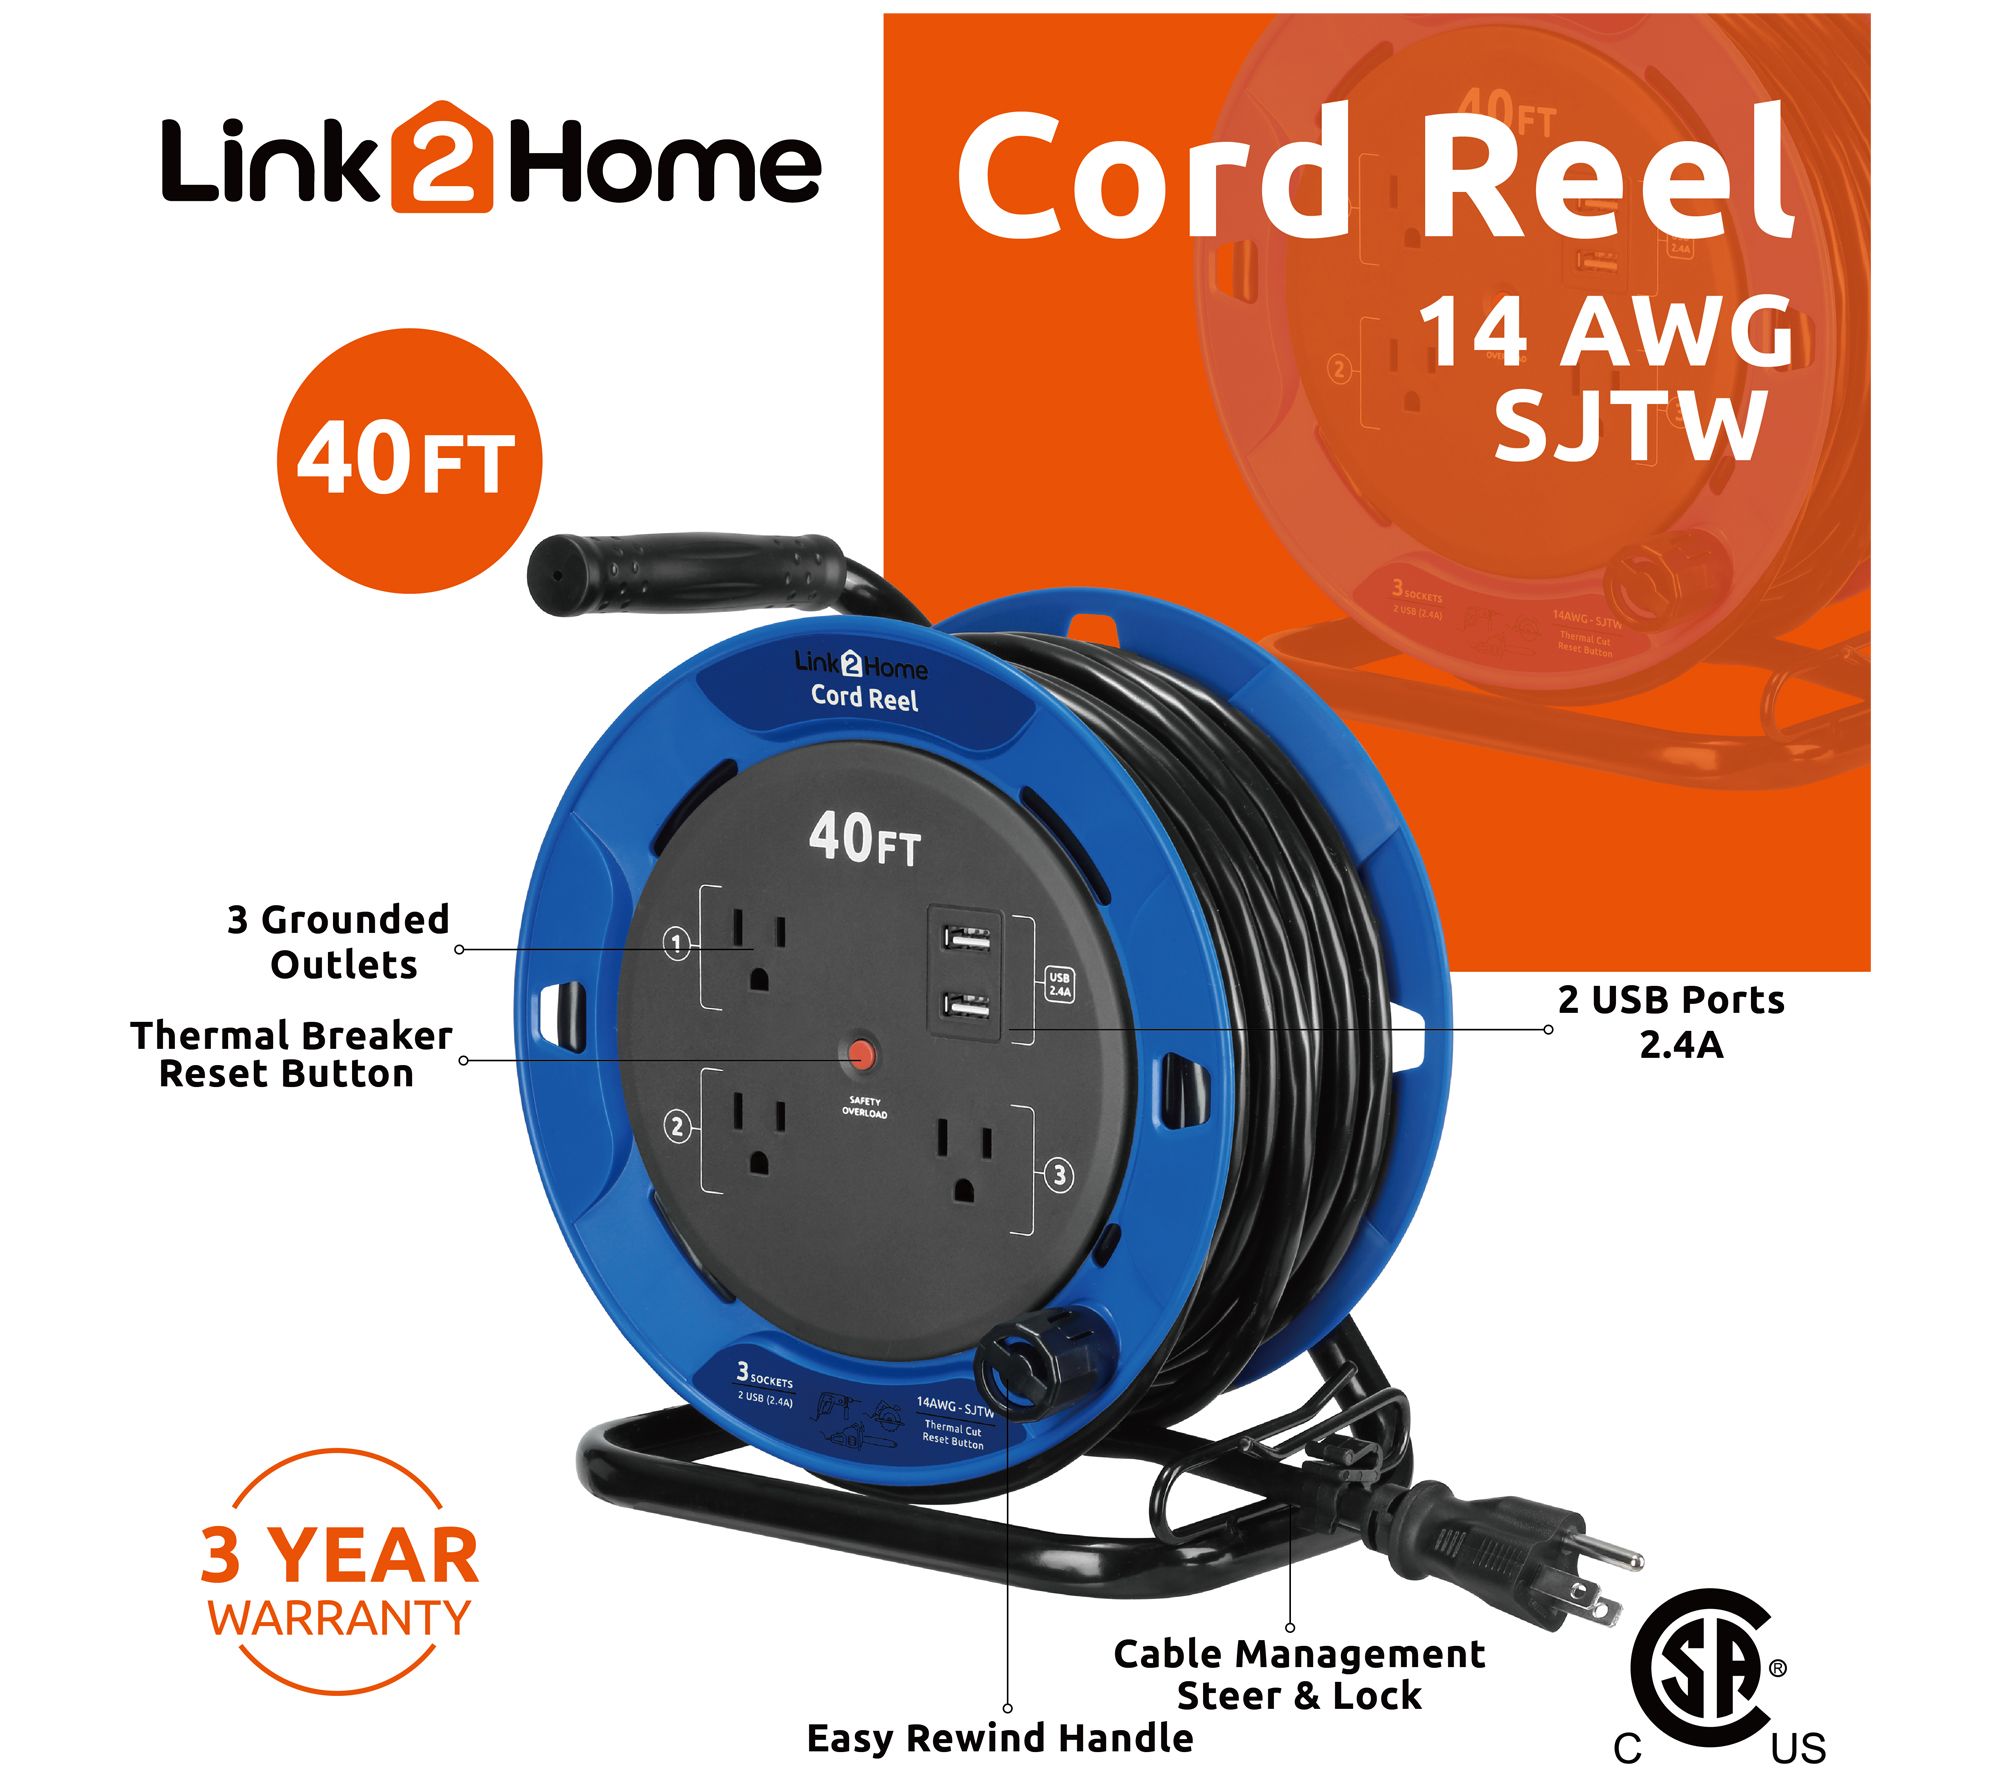 Link2Home Cord Reel 25' Extension Cord with 3 Power Outlets, 2 USB